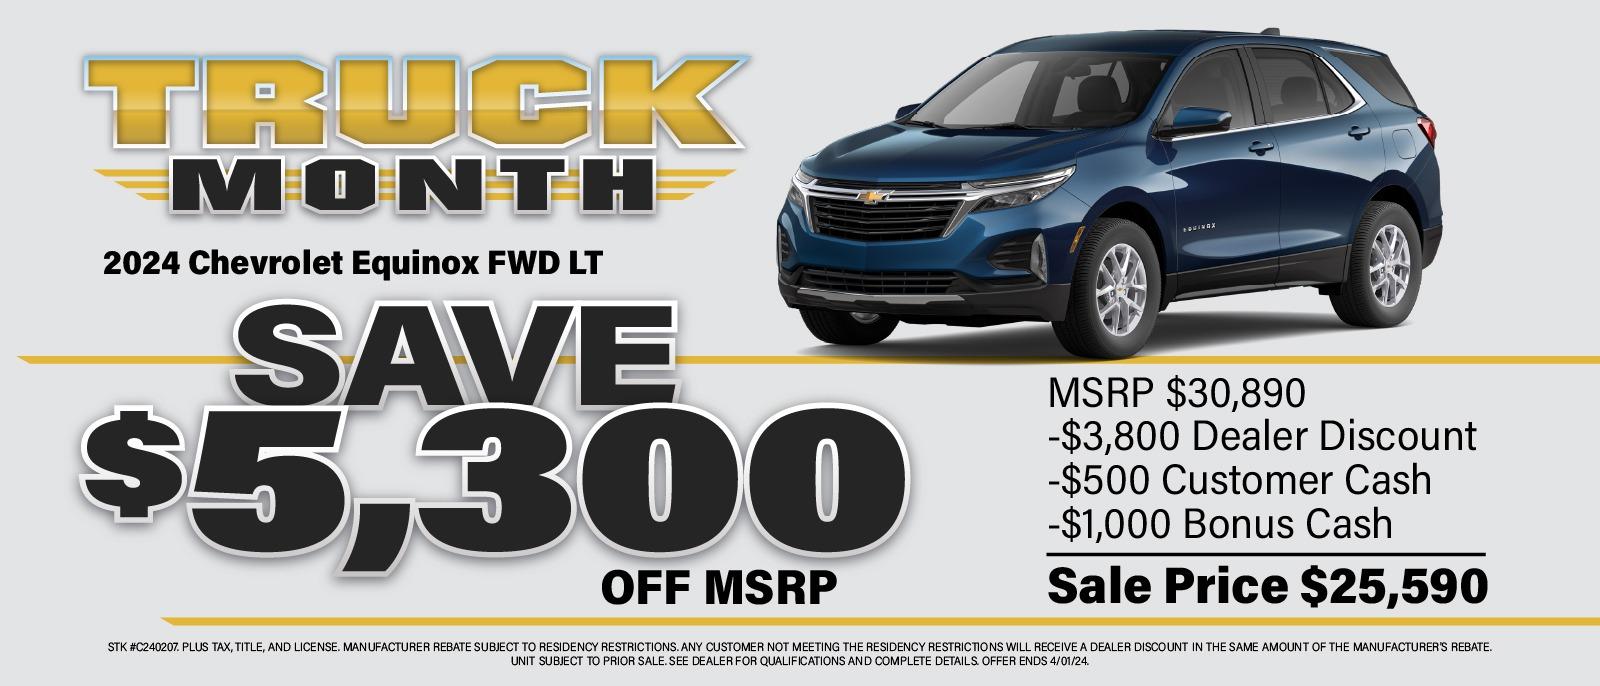 Truck Month Equinox Special!